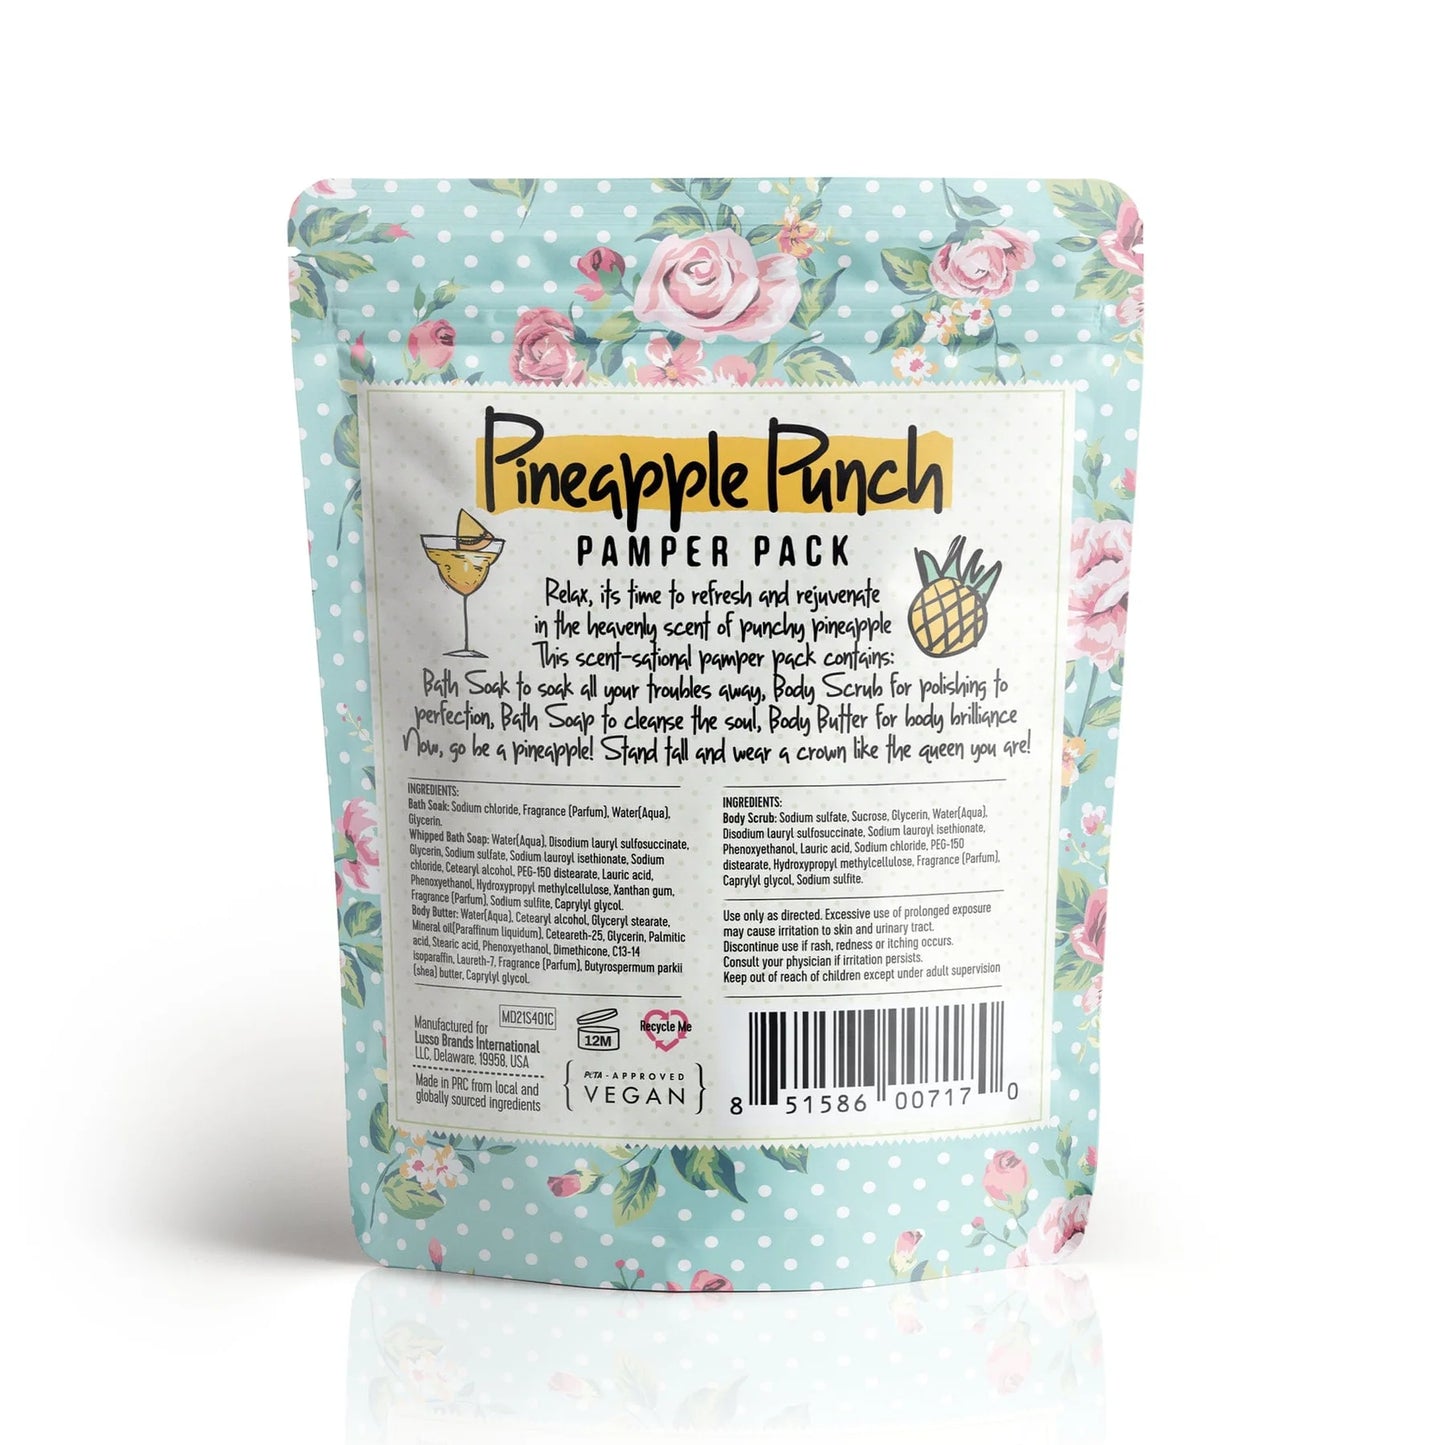 Pineapple Punch Pamper Pack - 4 x 1oz X 12